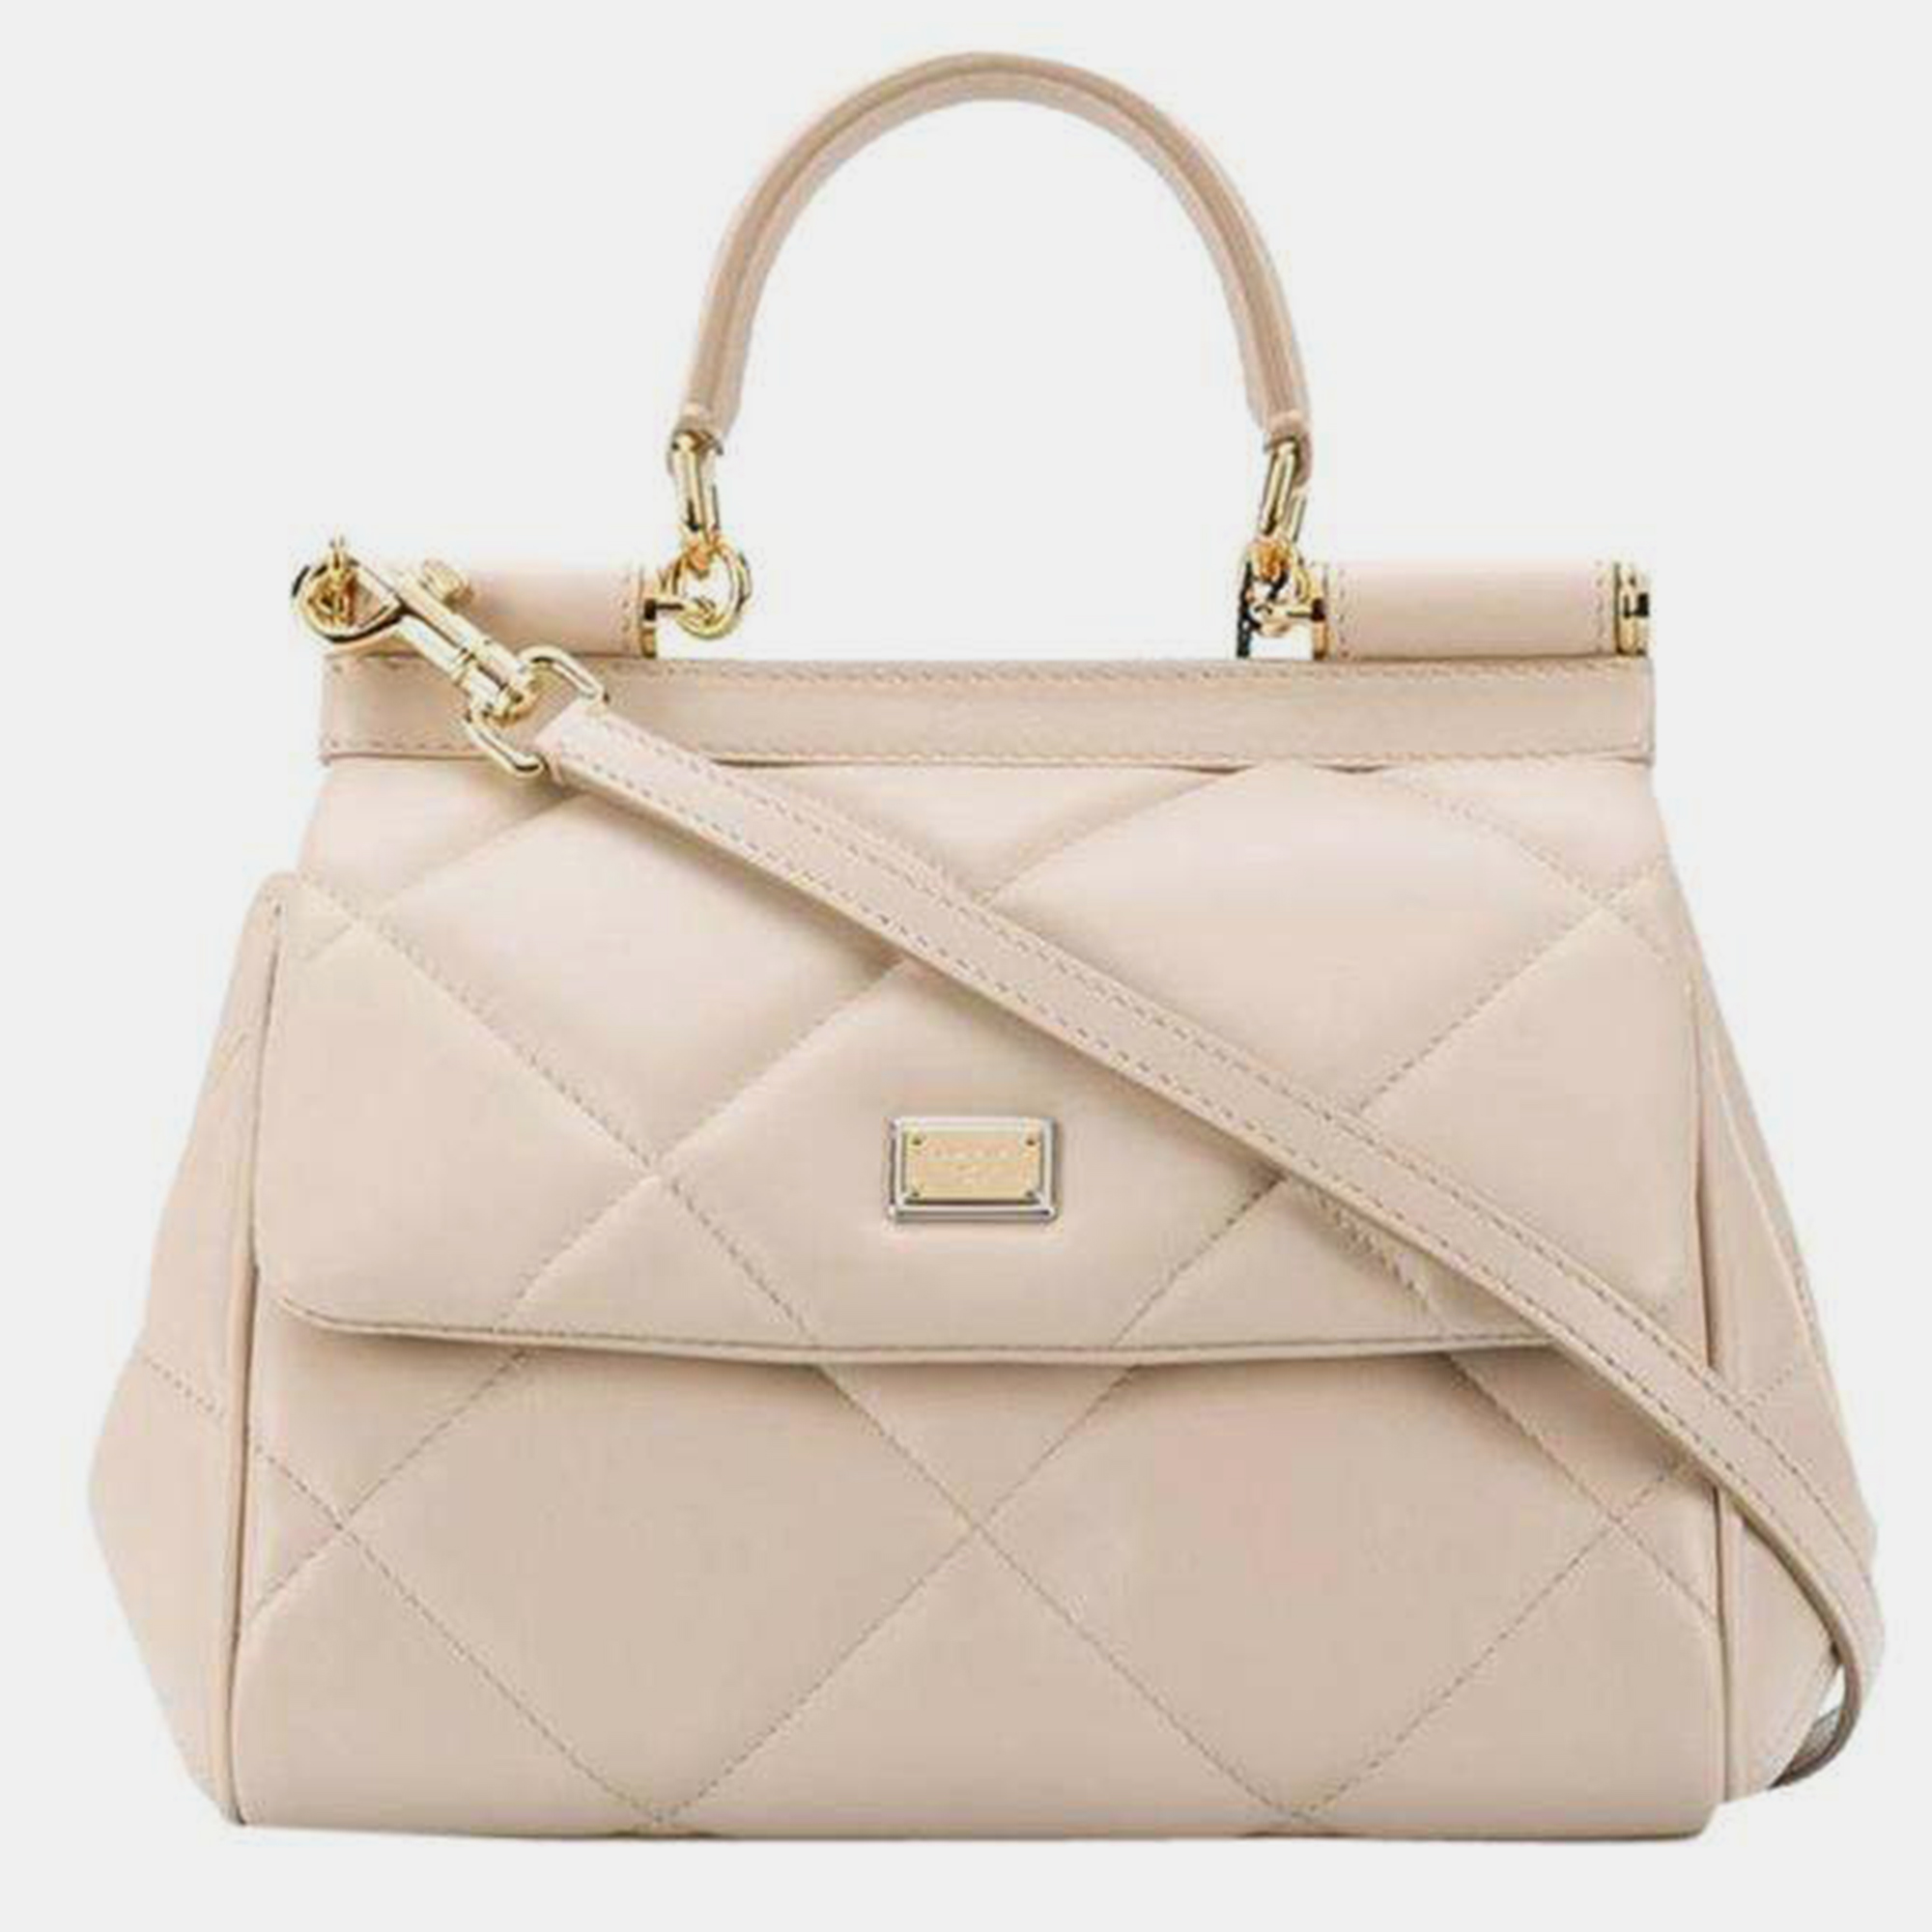 Dolce & Gabbana Beige Quilted Leather Sicily Top Handle Bag